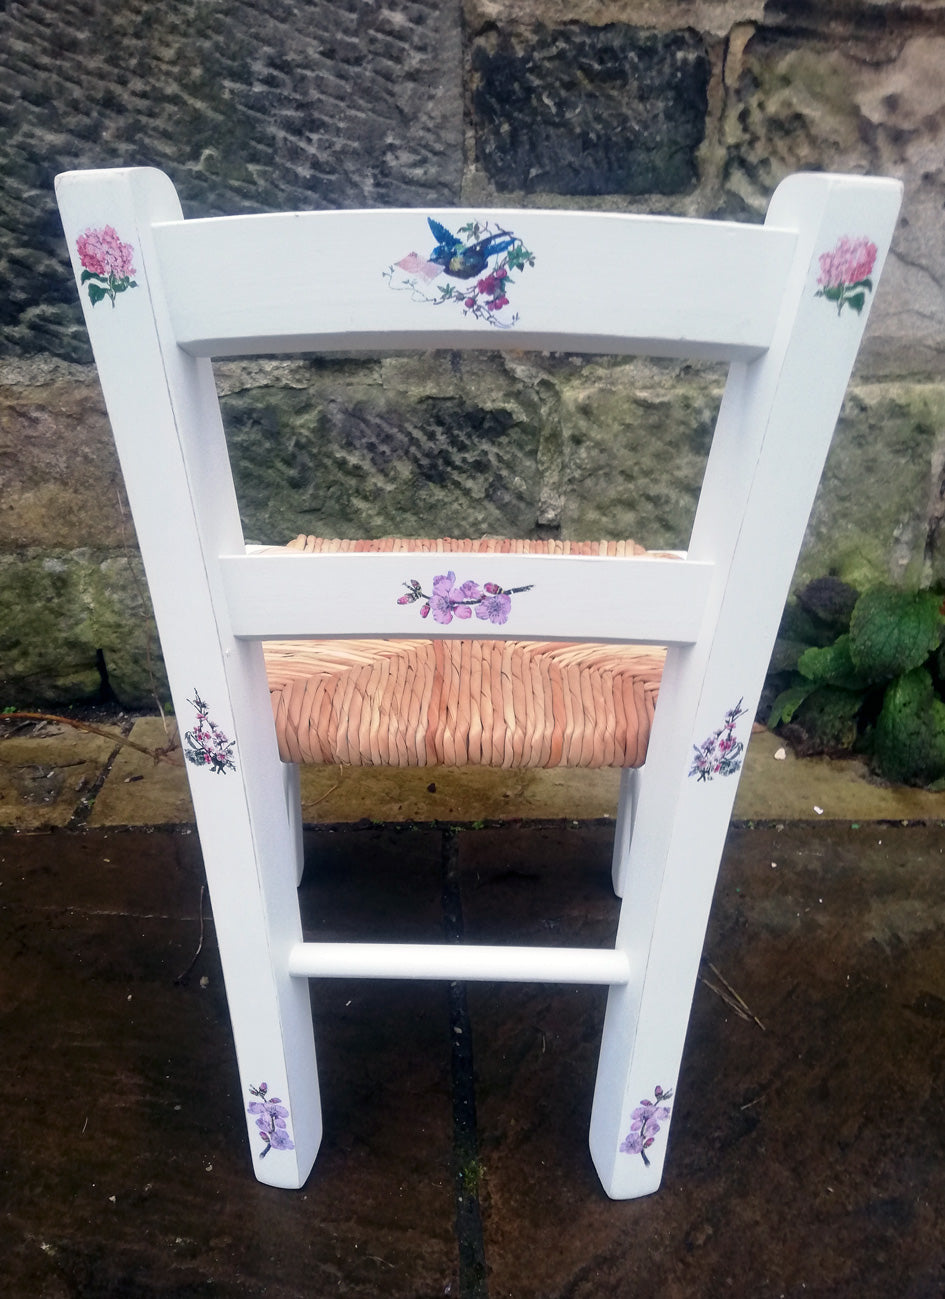 Rush seat personalised children's chair - Blossom Bird theme - made to order